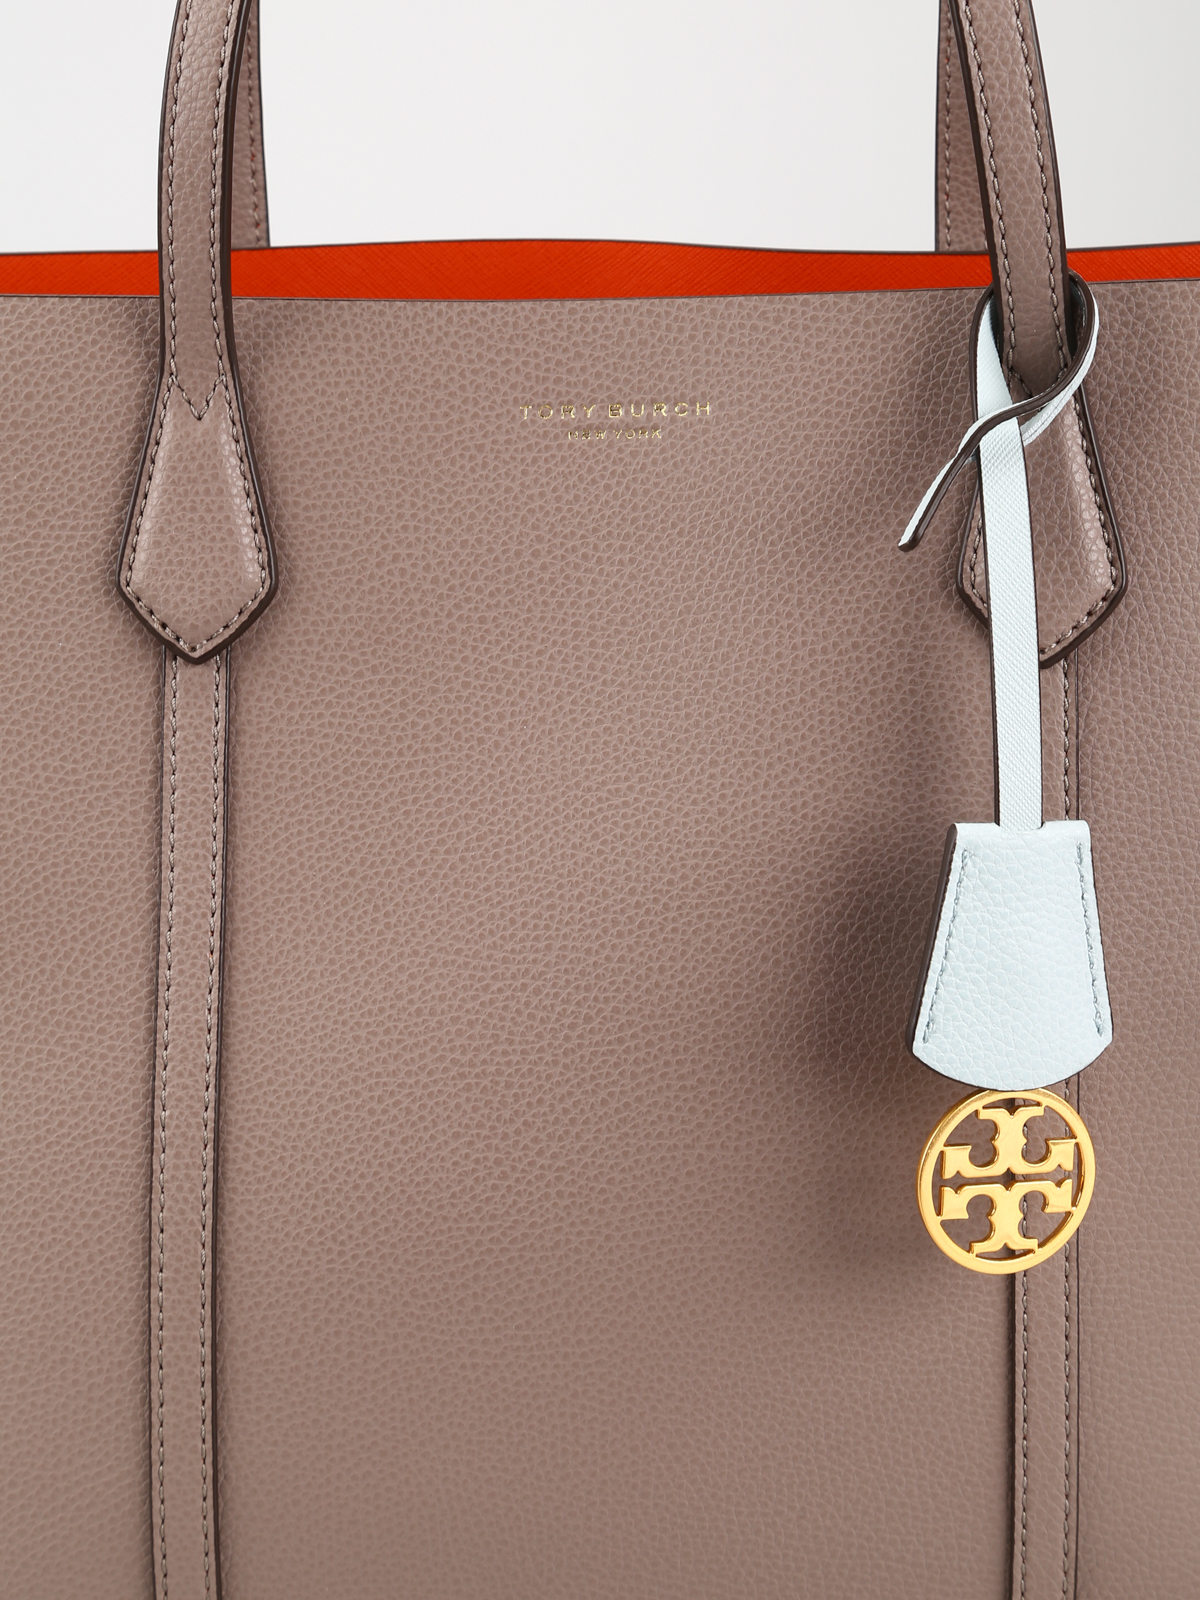 Totes bags Tory Burch - Perry Triple Compartment grained leather